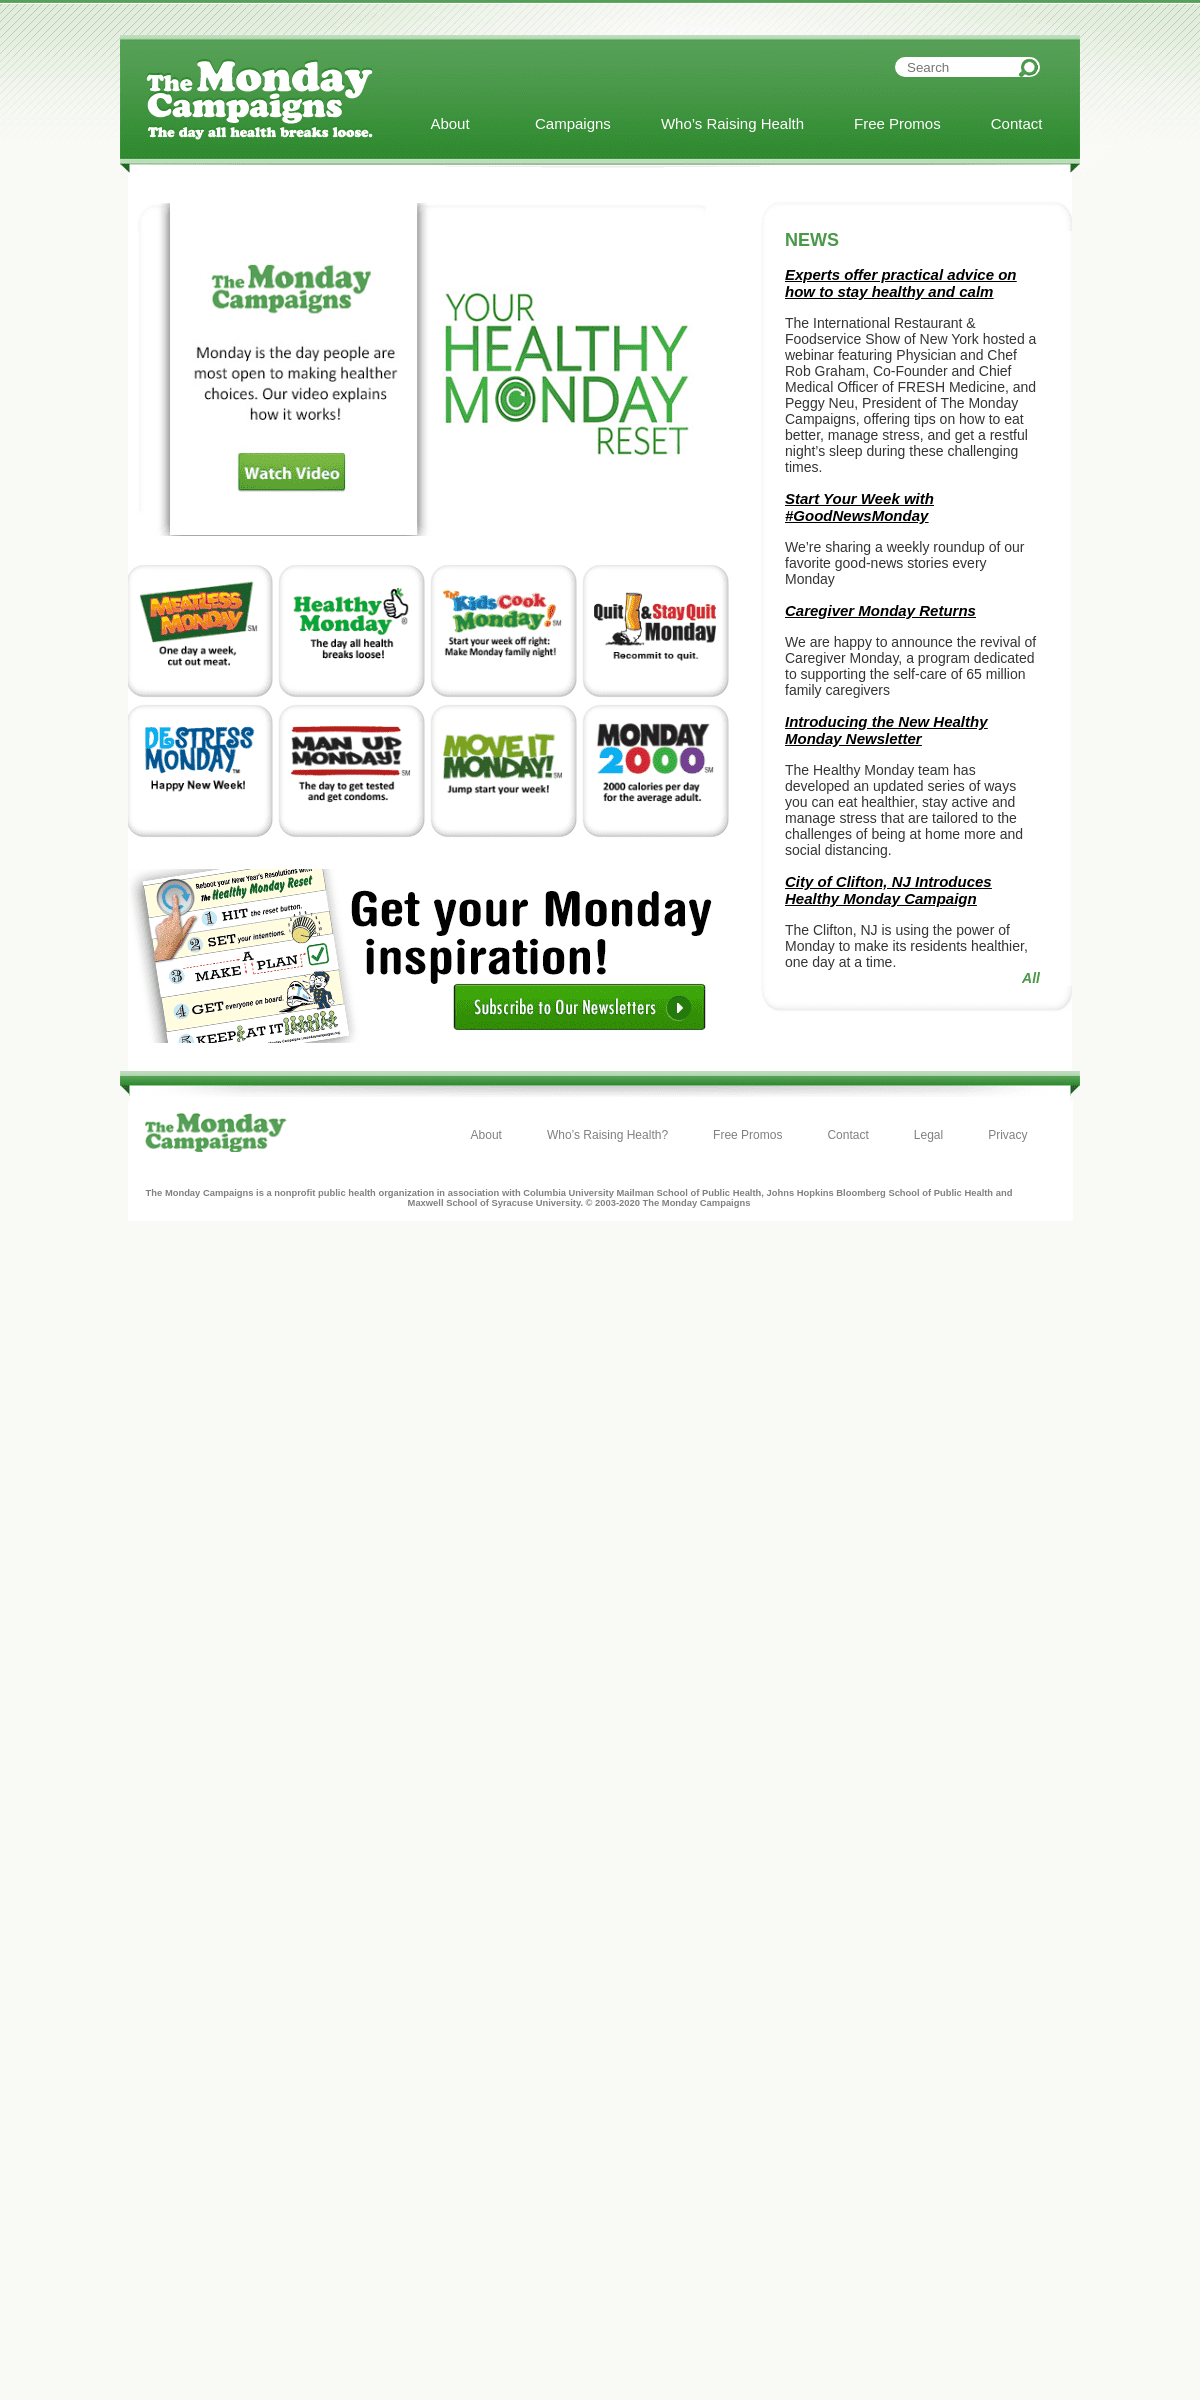 A complete backup of mondaycampaigns.org